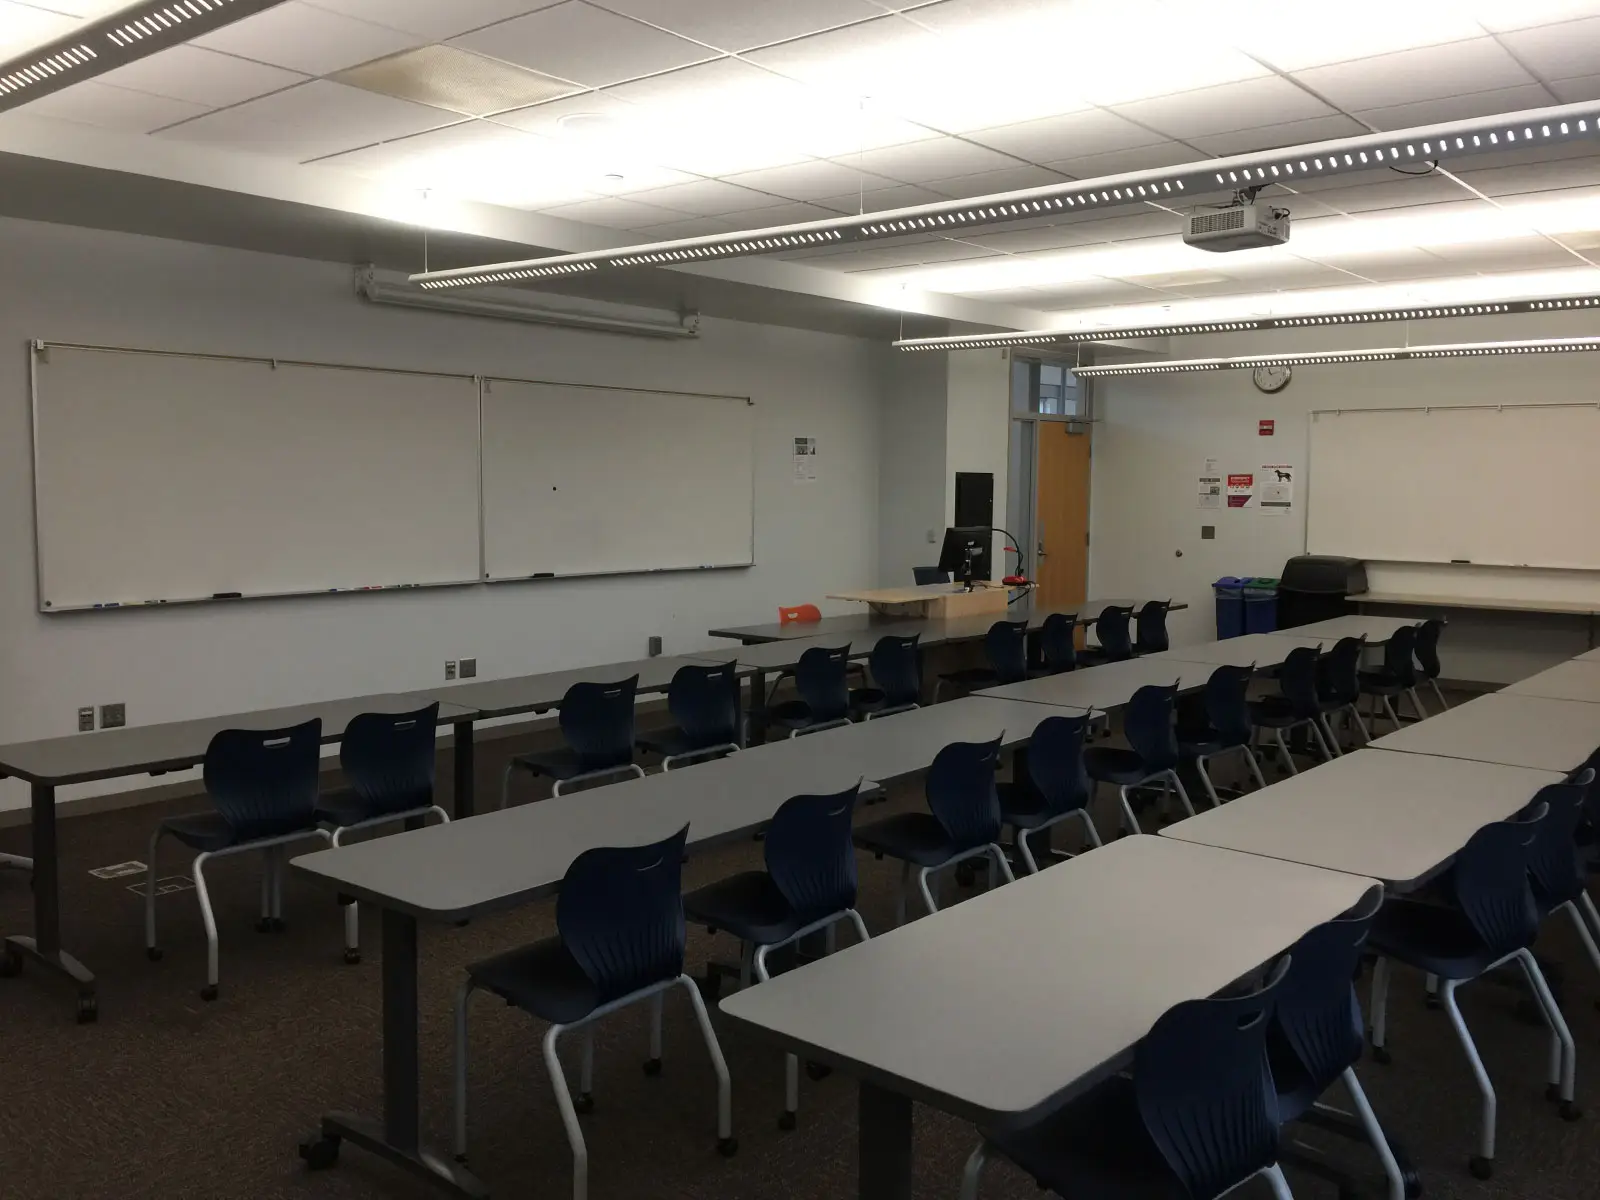 Rows of blue chairs and tables in front of a podium and white board in classroom W210 on the WIlsonville campus